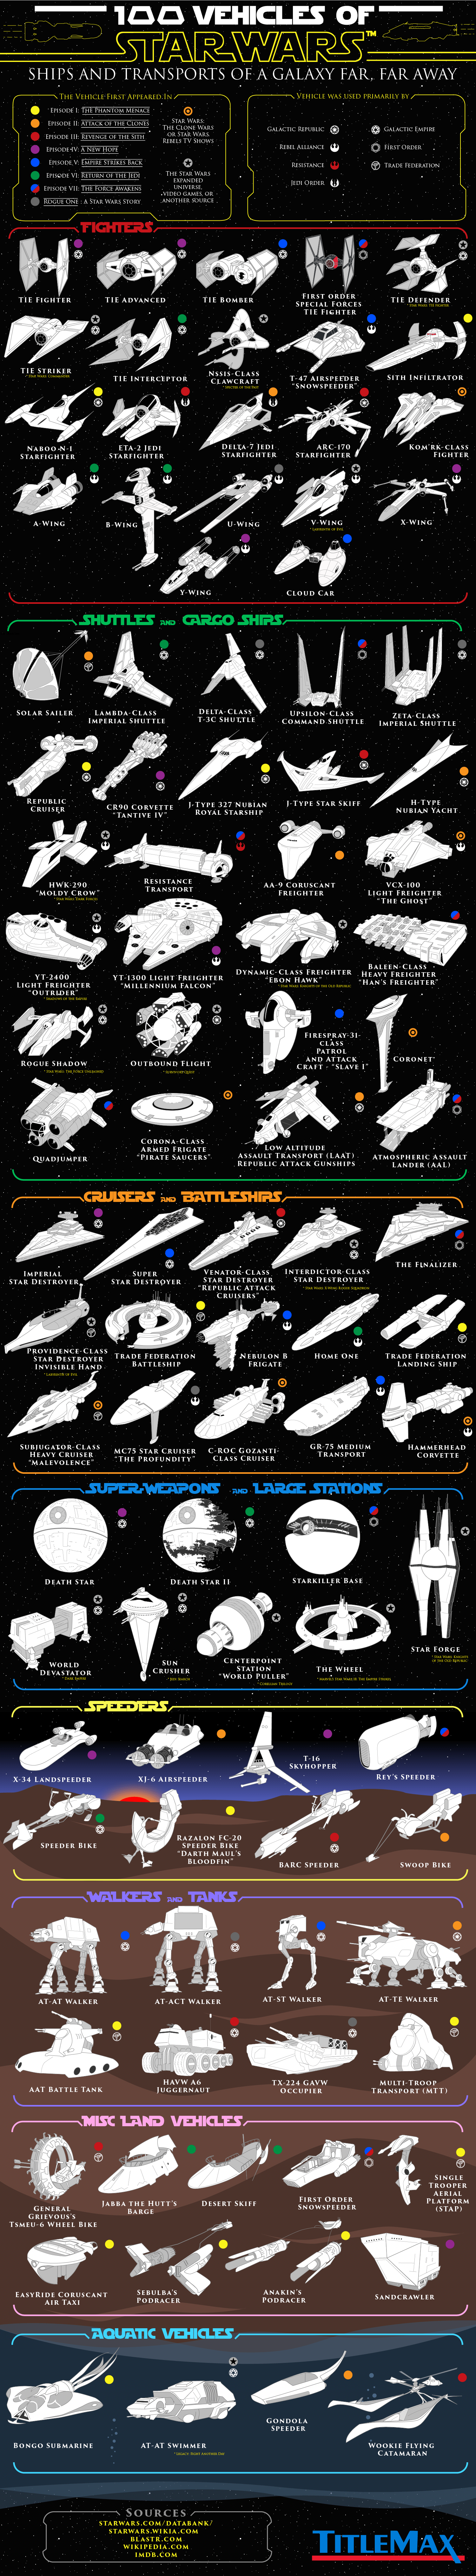 100 Super Fast Stealth Spaceships From Star Wars Titlemax